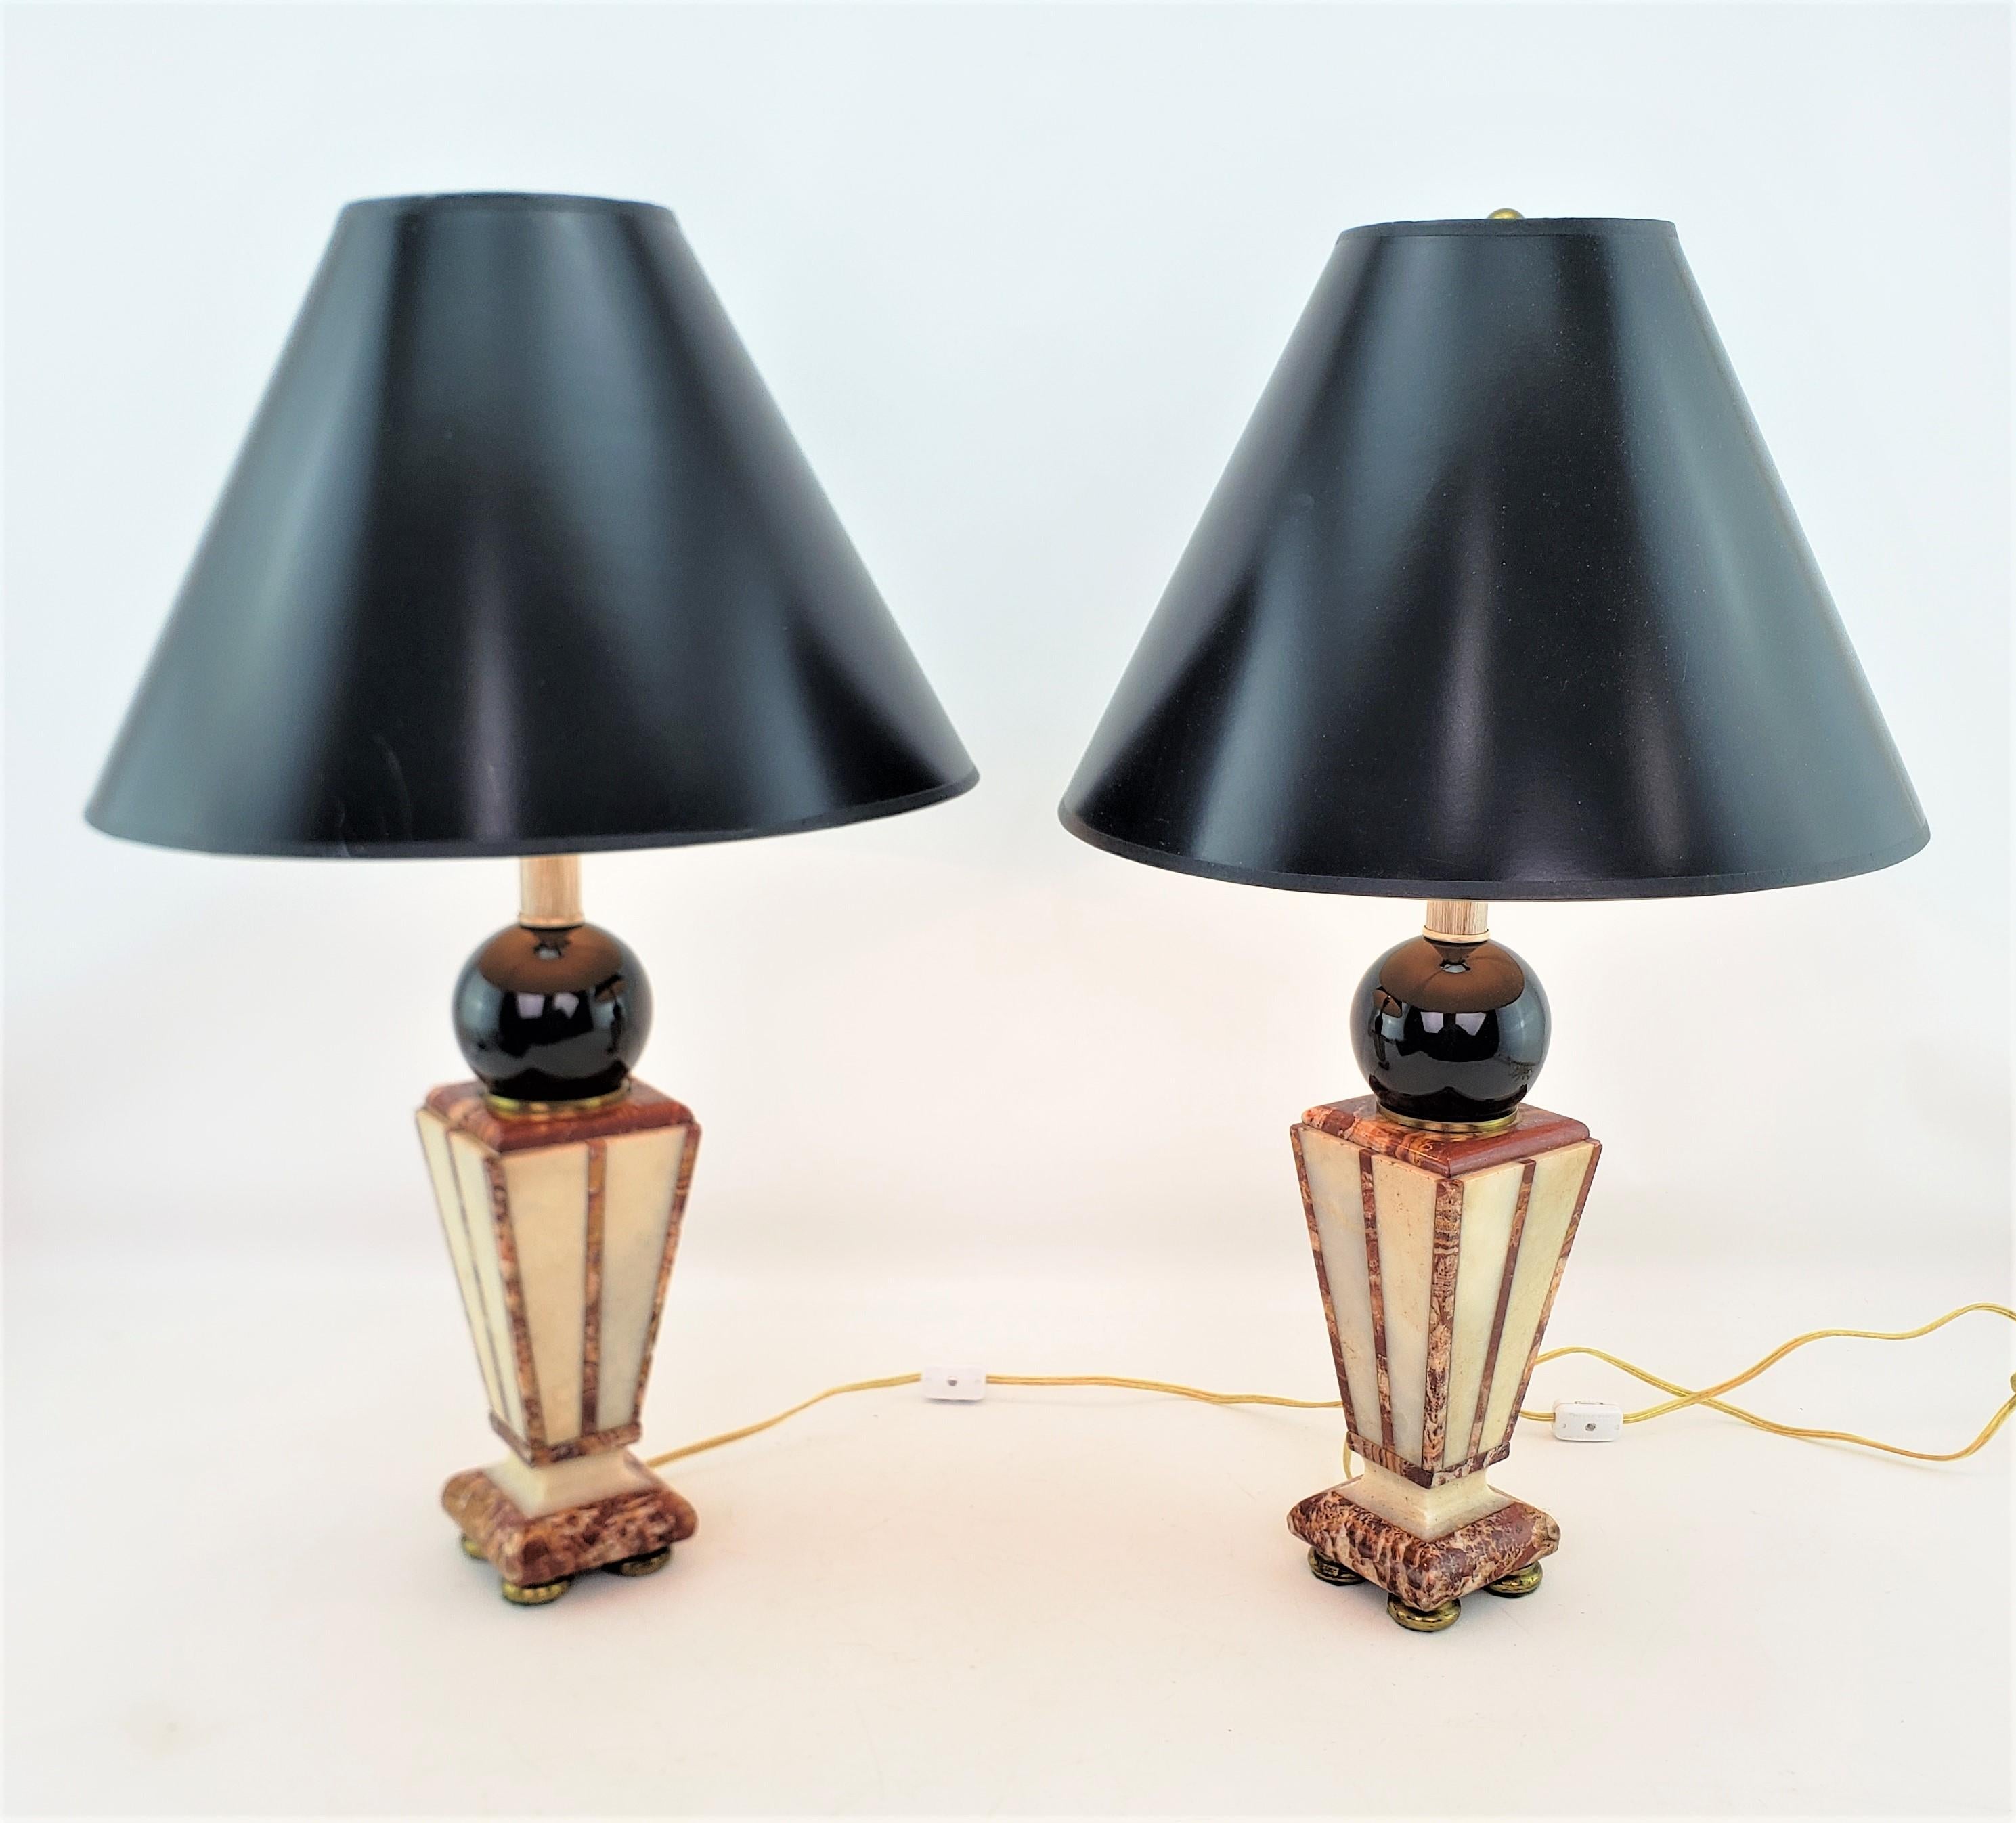 Pair of Converted Art Deco Cut Two Tone Geometric Cut Marble Table Lamp Bases In Good Condition For Sale In Hamilton, Ontario